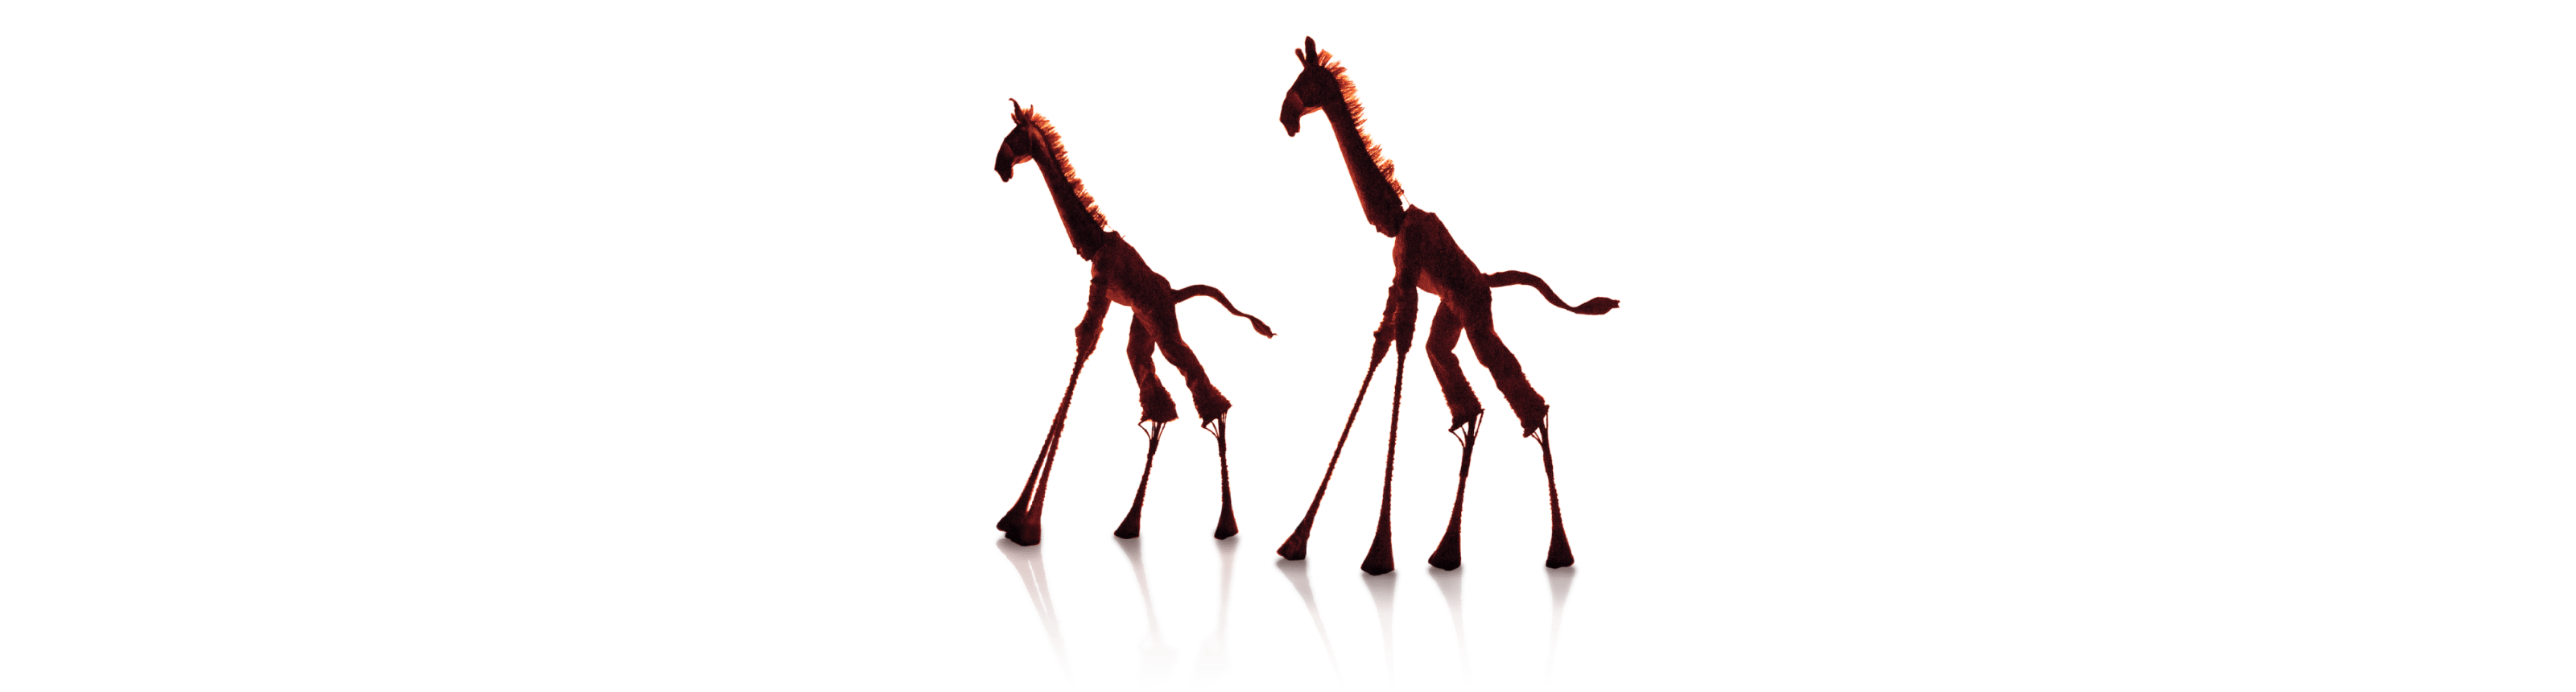 Imagery of two giraffes from the show